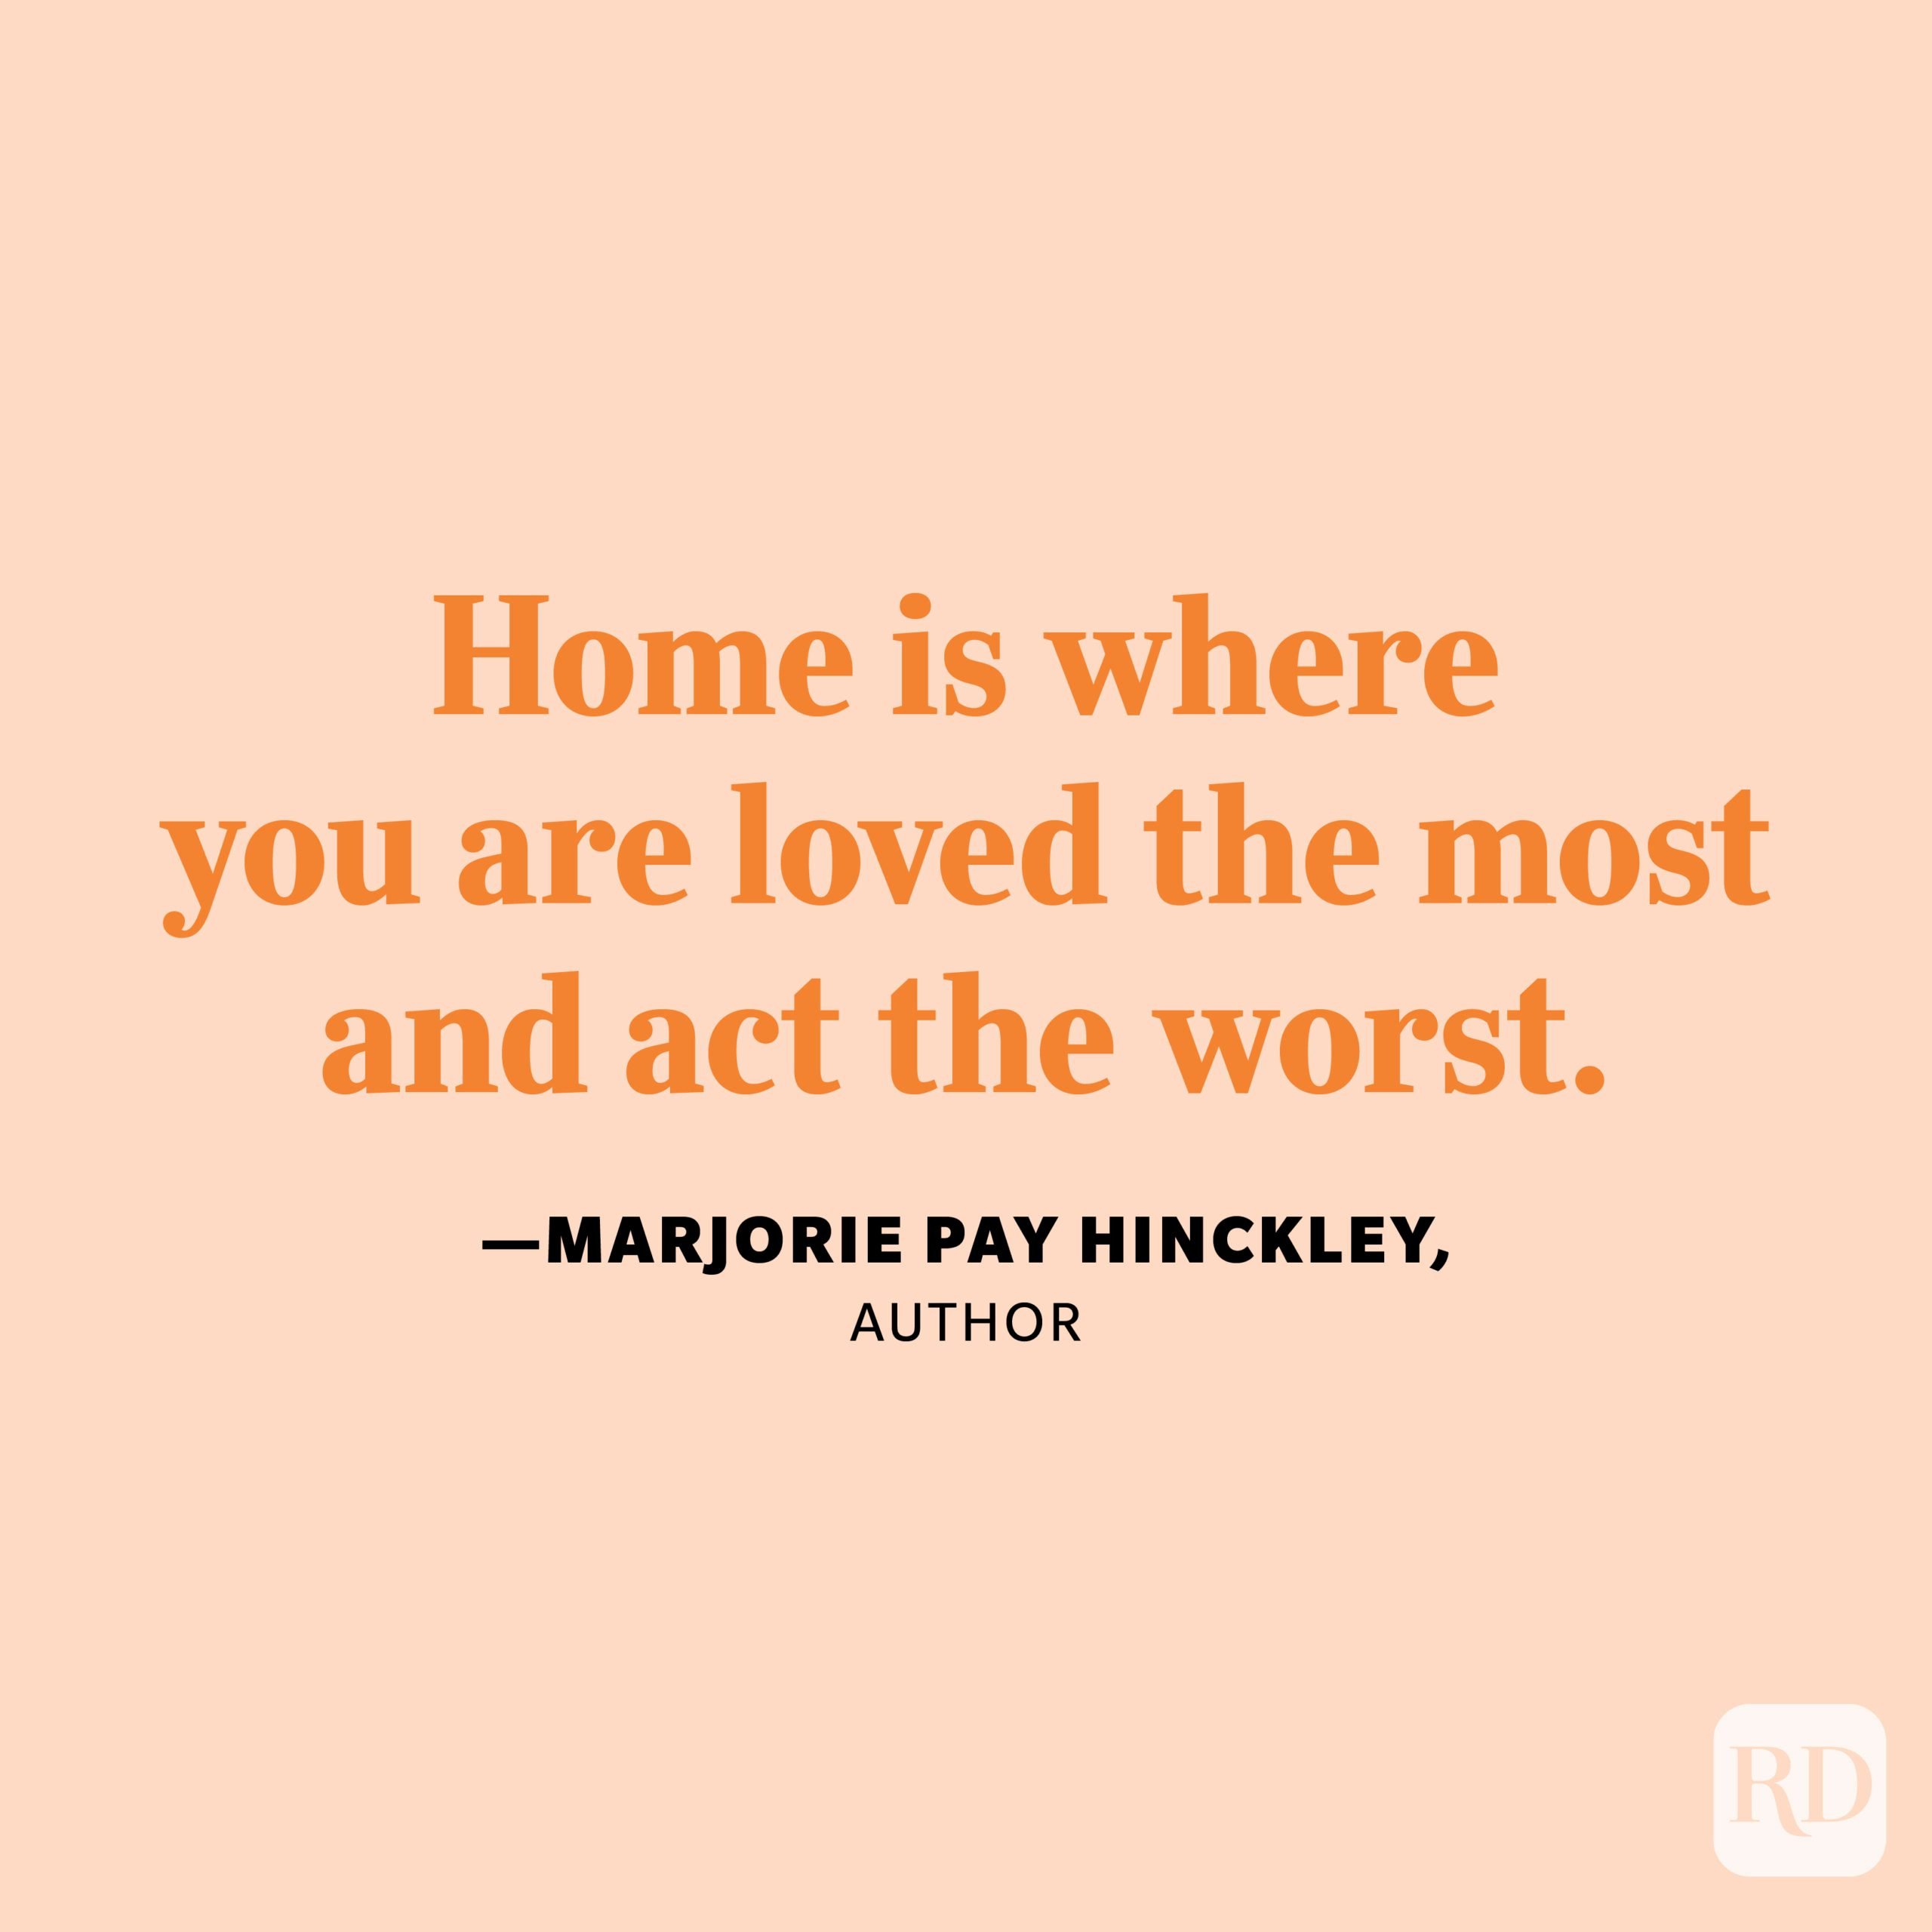 "Home is where you are loved the most and act the worst." —Marjorie Pay Hinckley, author